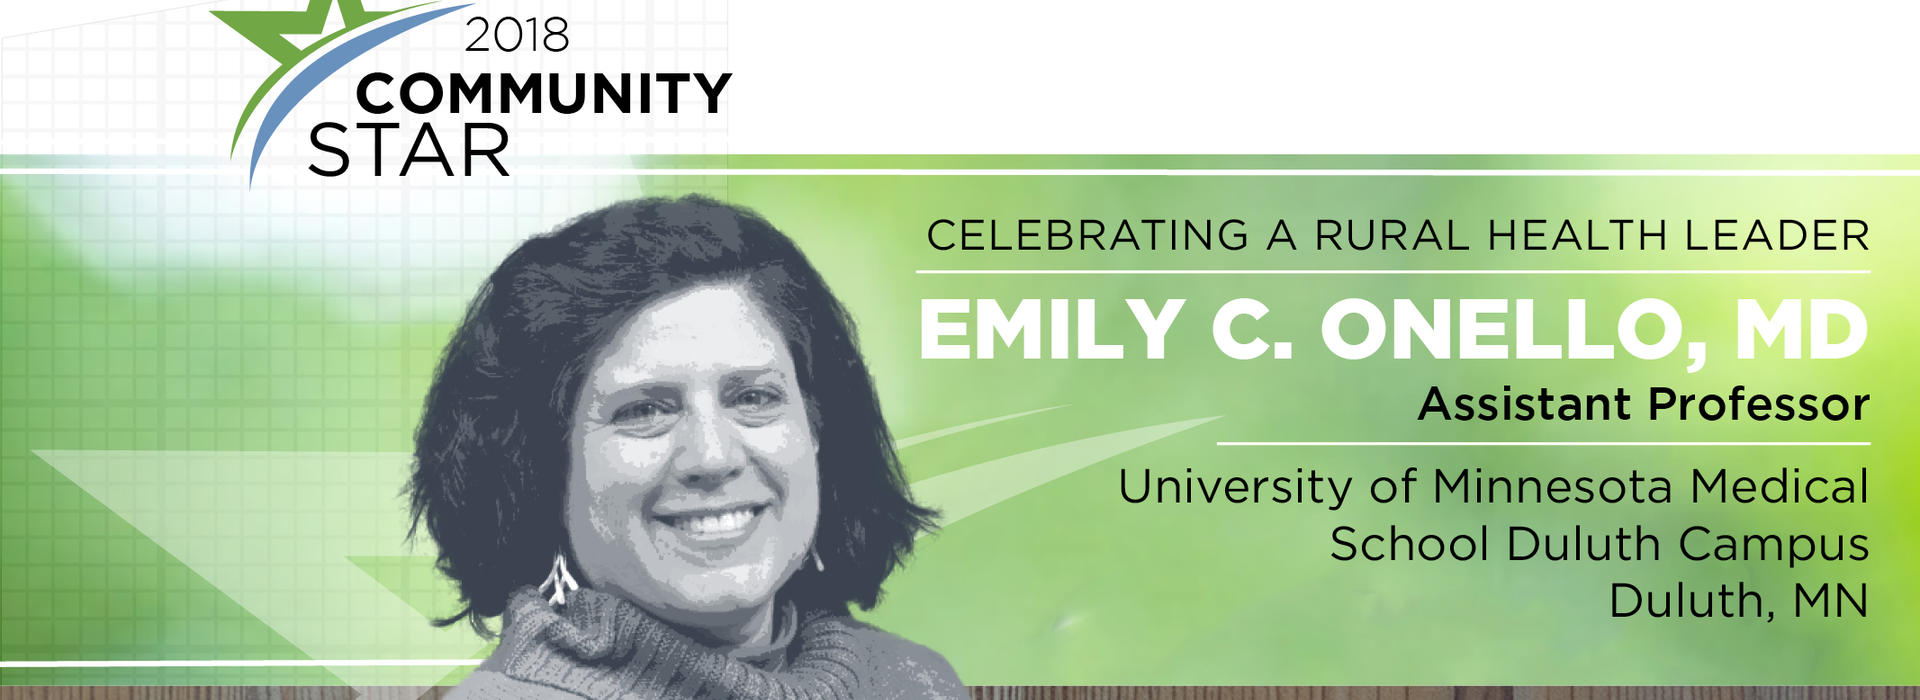 Dr. Emily Onello, named as a 2018 "Community Star" by the National Organization of State Offices of Rural Health (NOSORH)